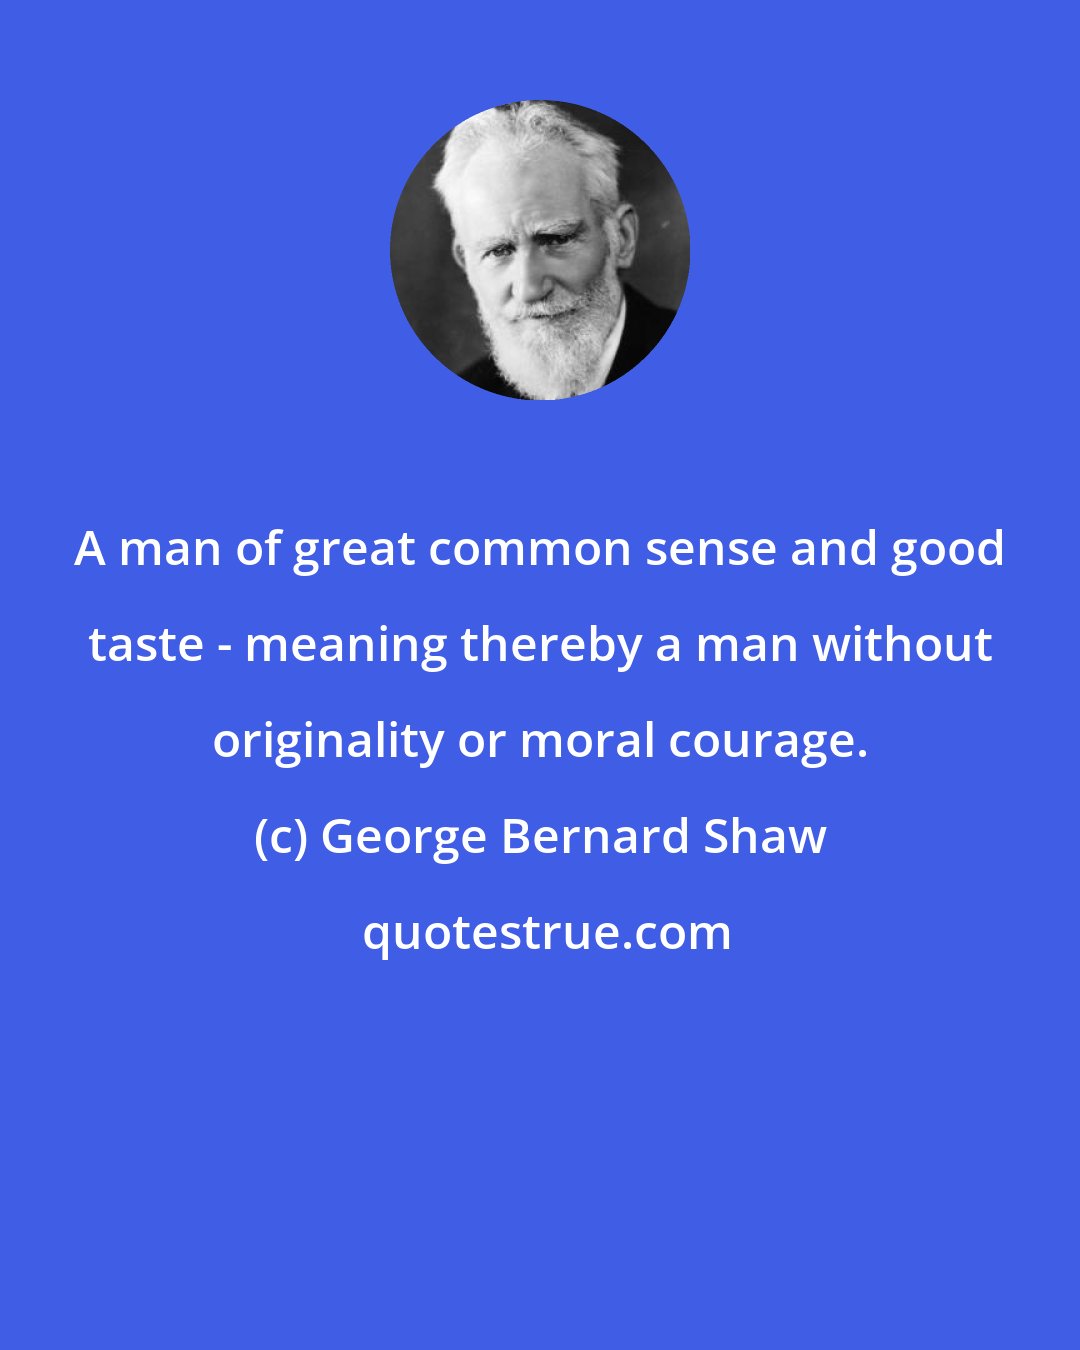 George Bernard Shaw: A man of great common sense and good taste - meaning thereby a man without originality or moral courage.